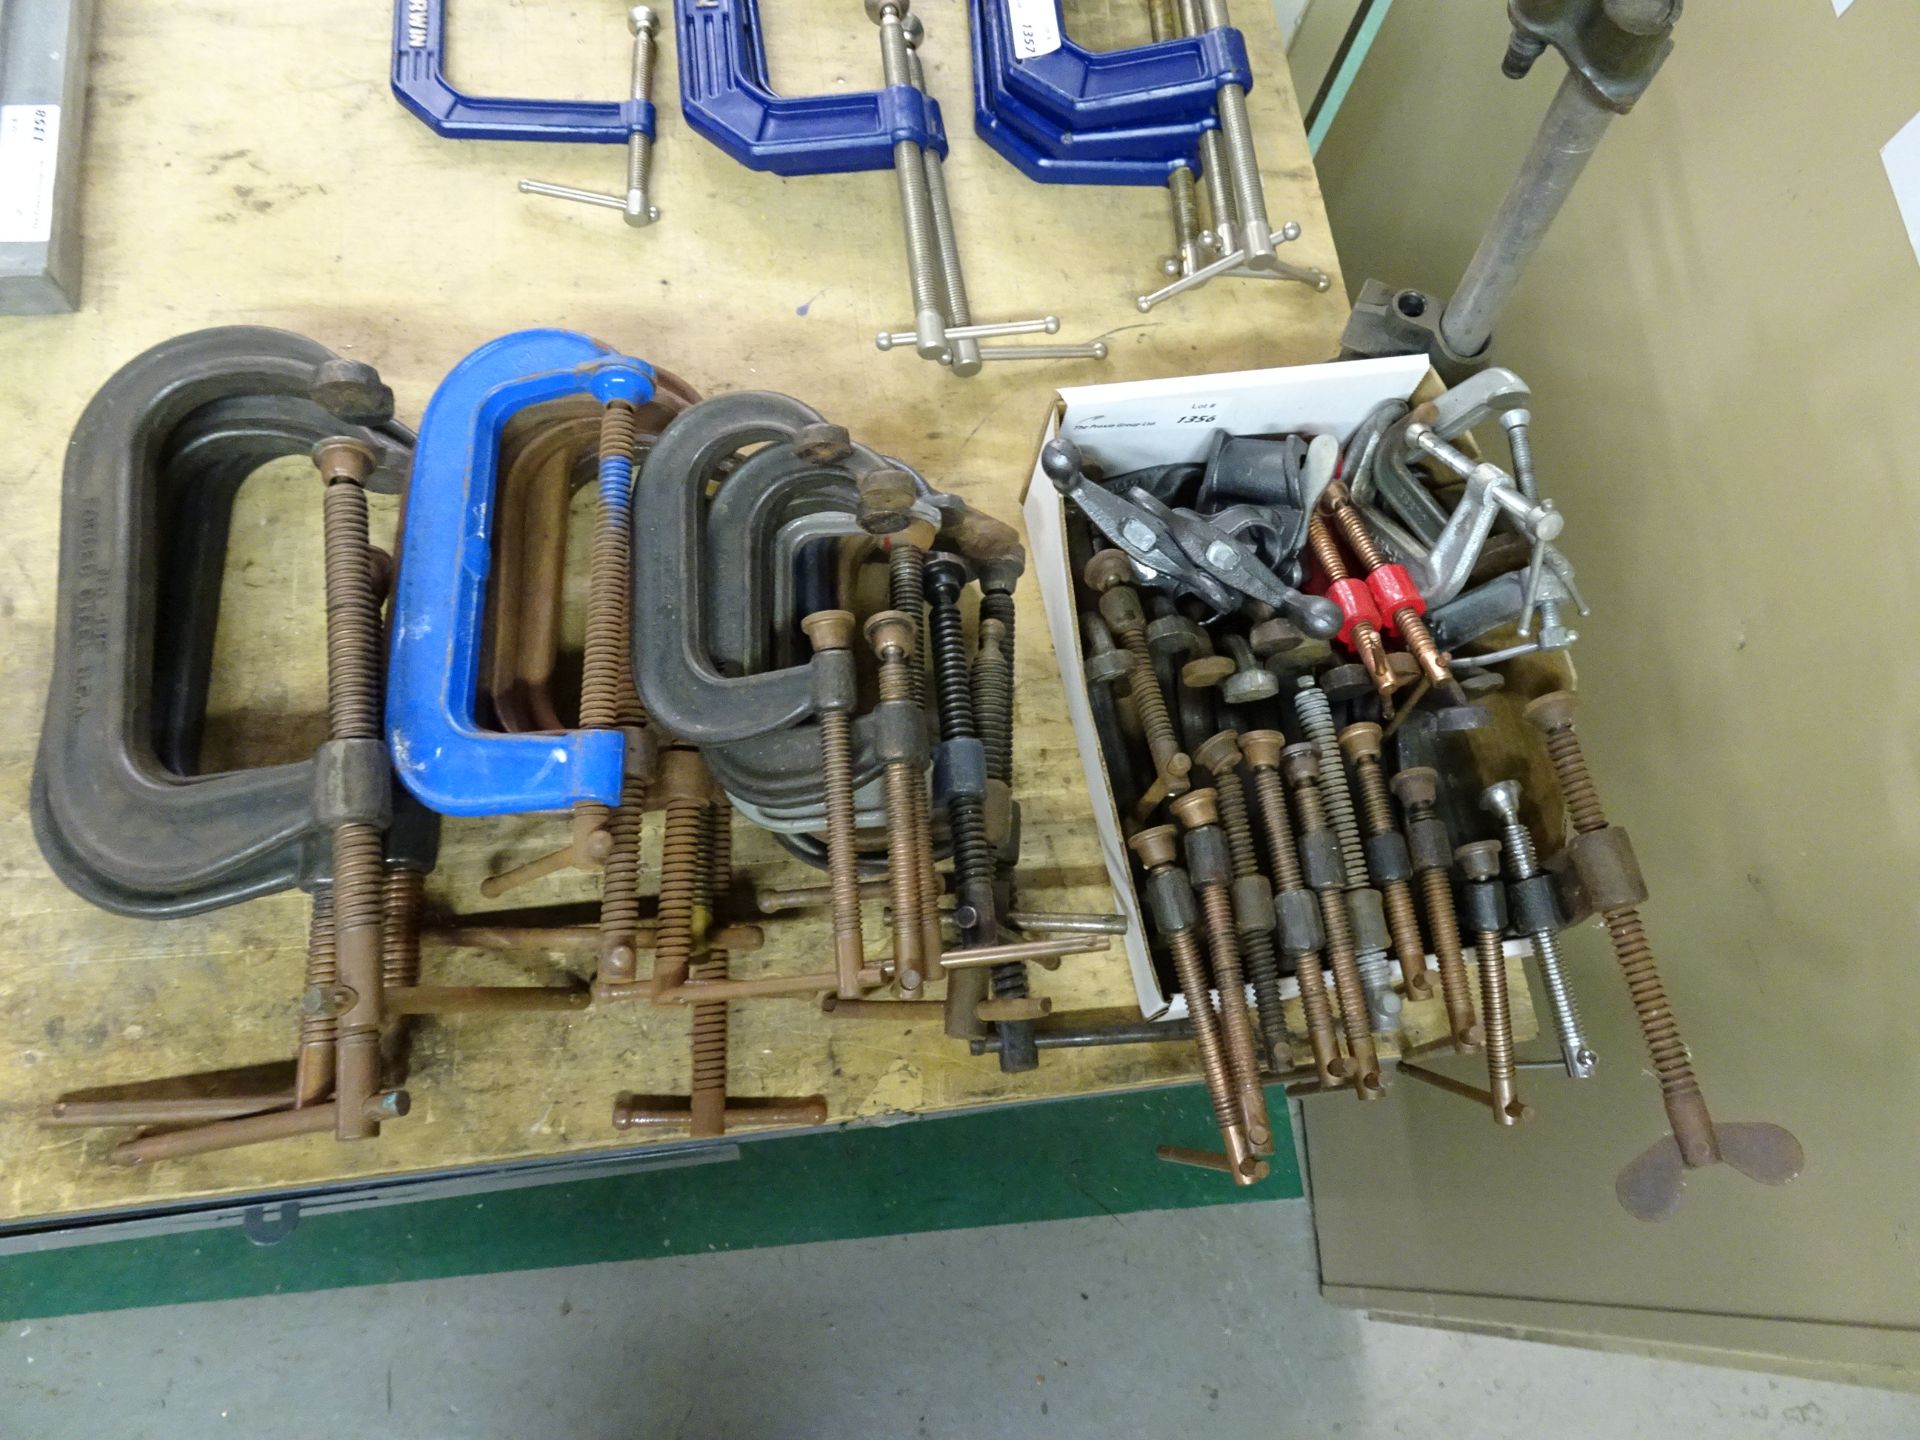 (1) Large Lot Of Various Sized C-Clamps, Sizes Range From 2 In. - 6 In., Approximately (35) C-Clamps